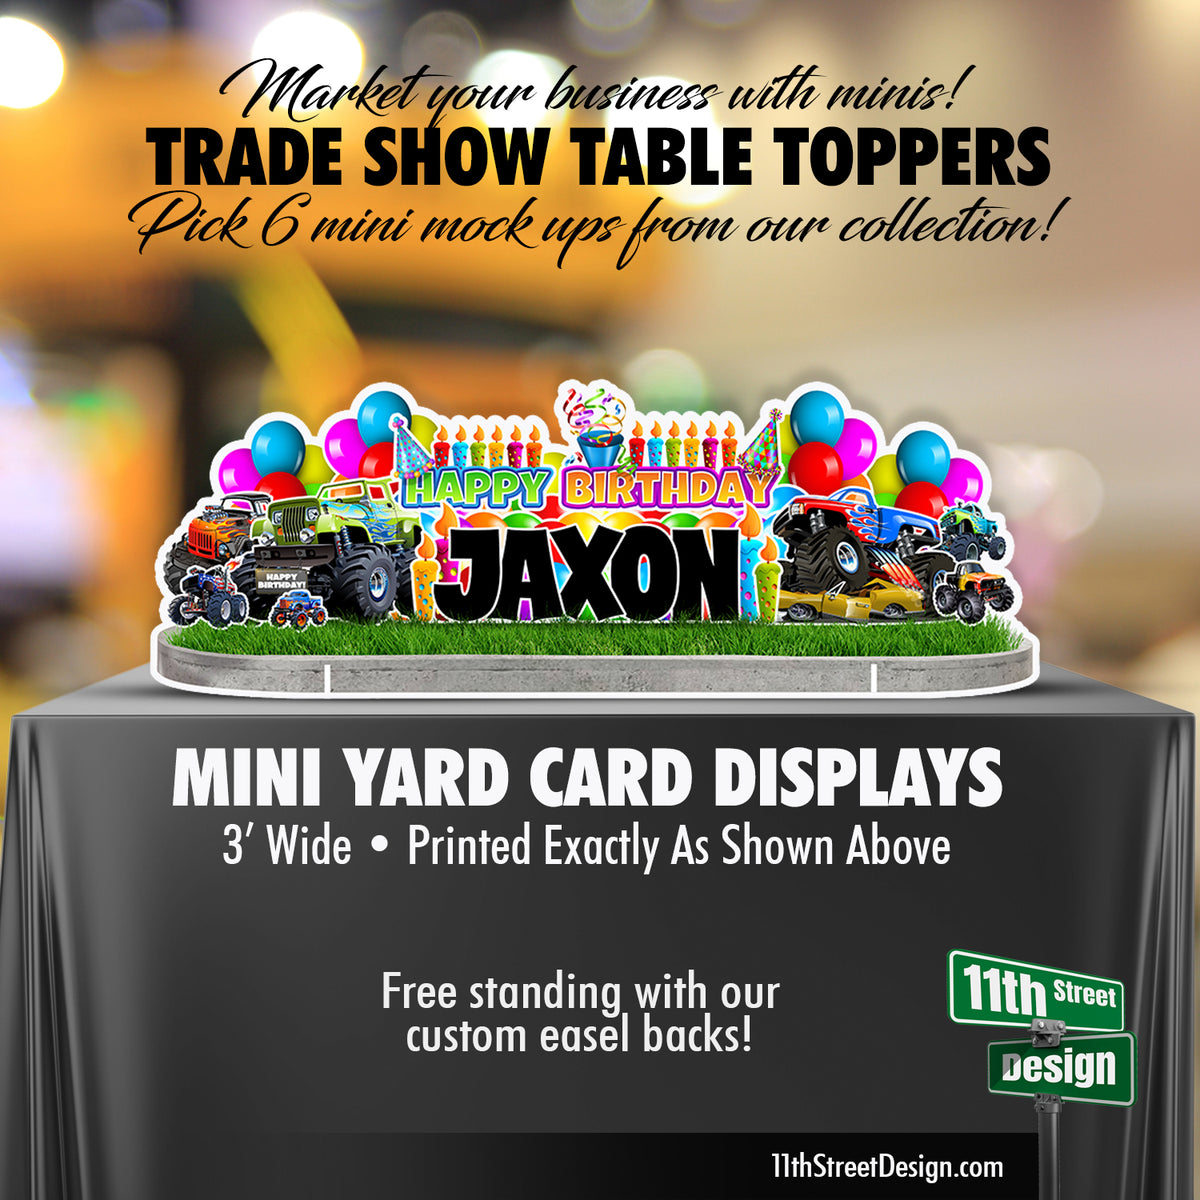 Pick 6 - Trade Show Table Toppers - Mini Yard Card Displays